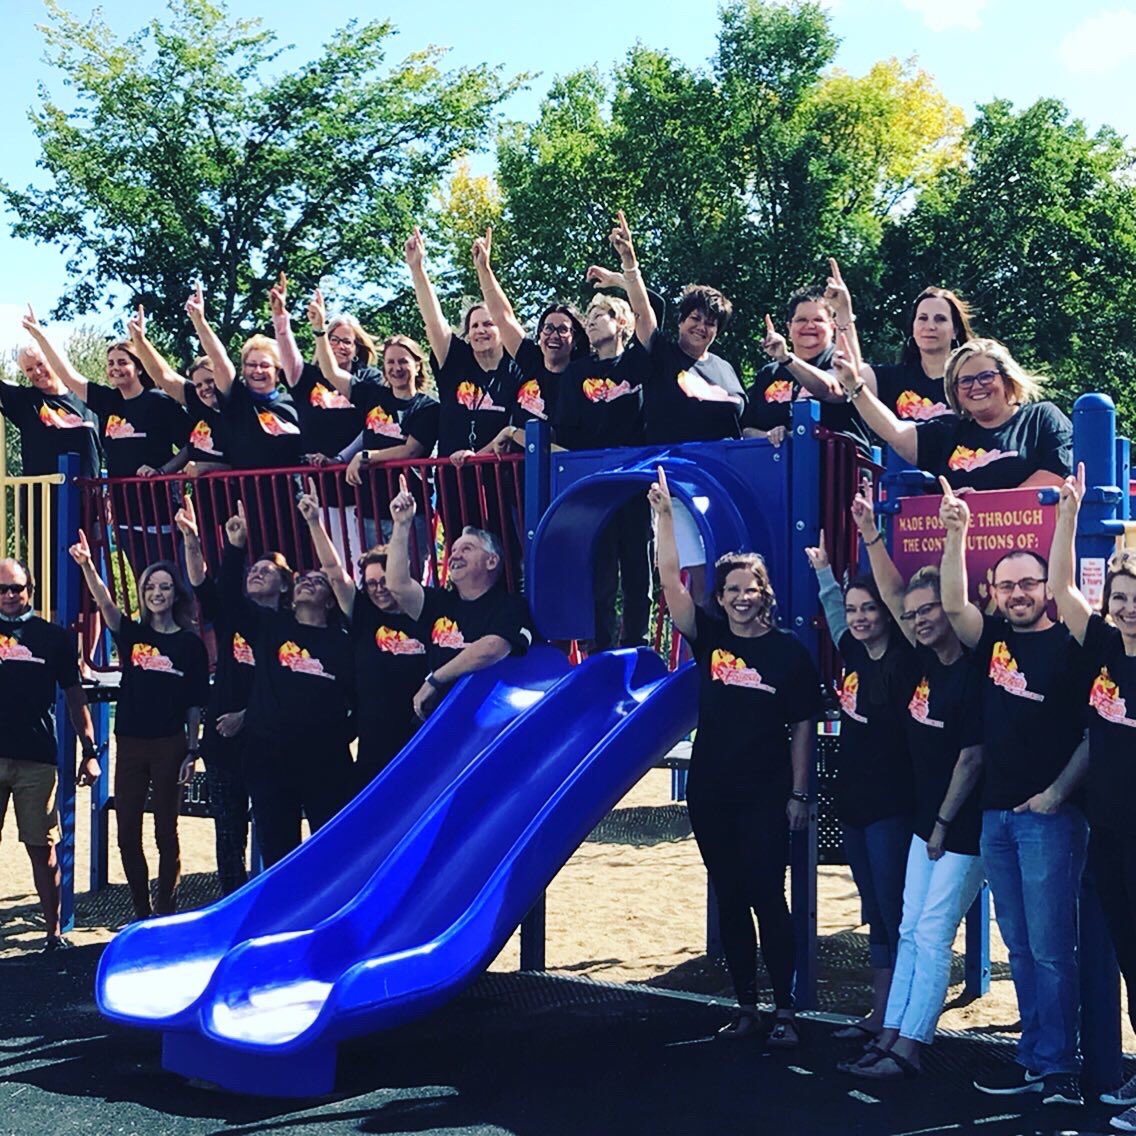 See you in September, Fam! ❤️ I couldn’t ask for a better group of people to work with 🥰 #FairviewRocks